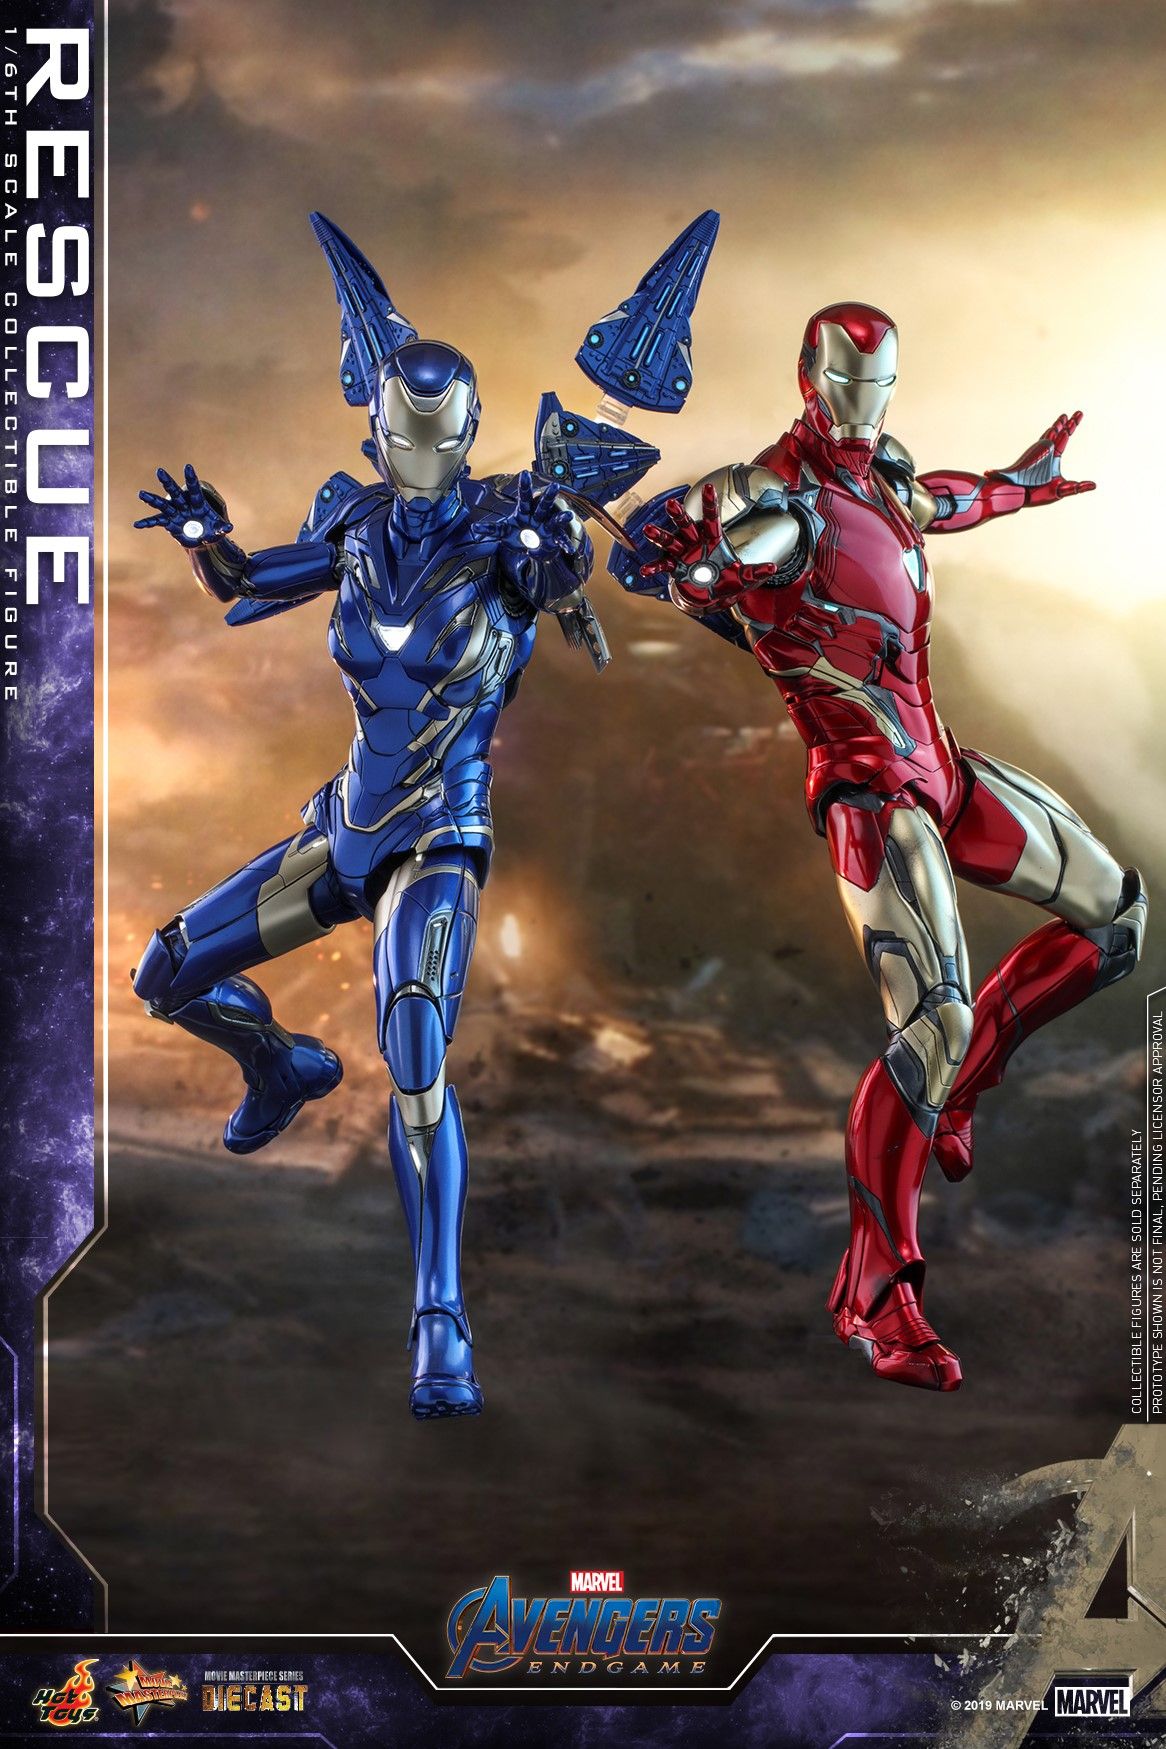 Hot Toys Shows Off Their AVENGERS: ENDGAME Pepper Potts Rescue Armor Action Figure